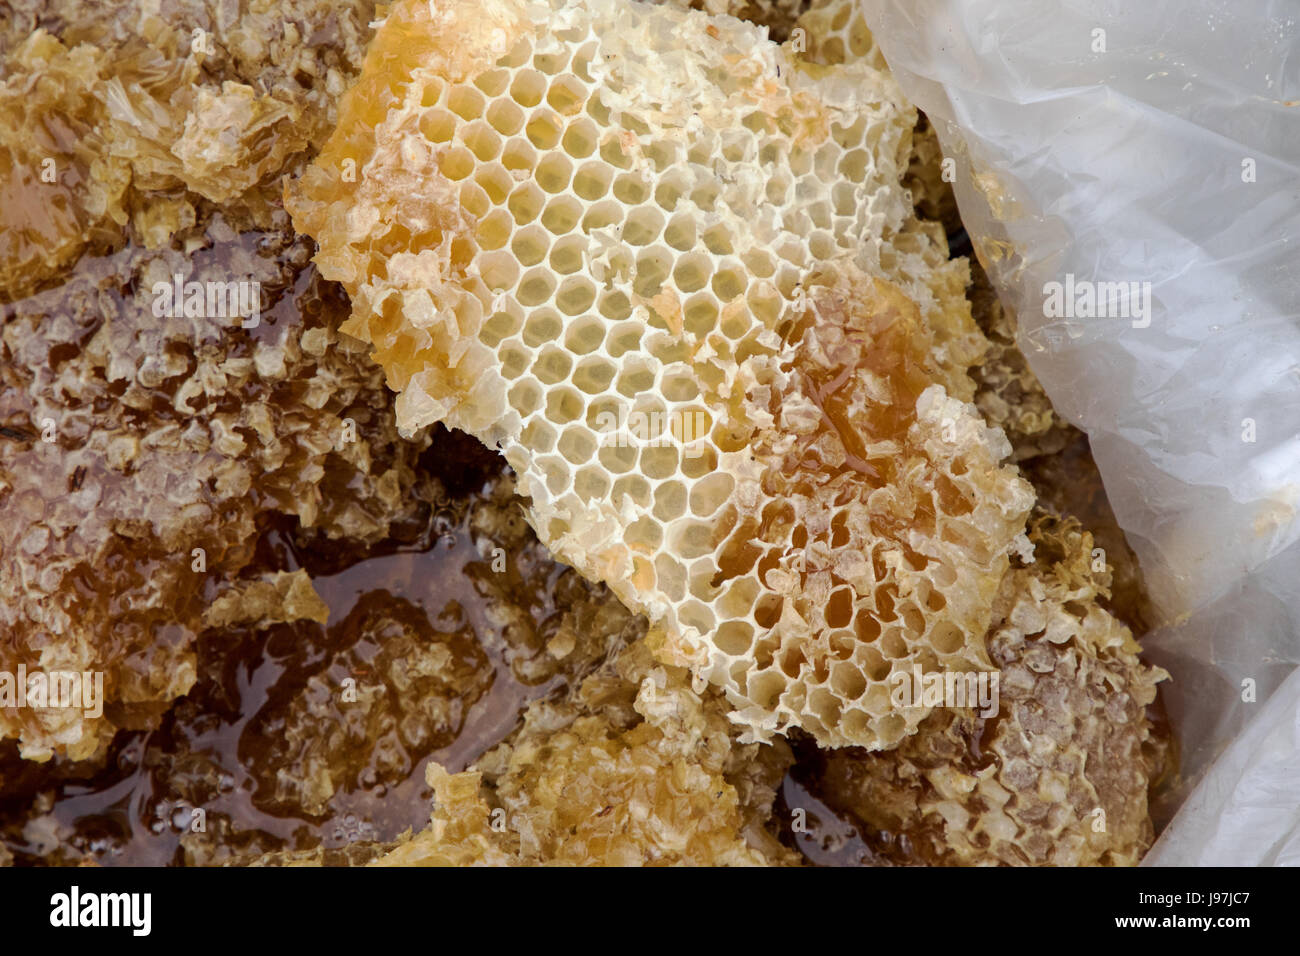 This a small honeycomb removed from the attic of a residential home in Los Angeles, California USA. Stock Photo